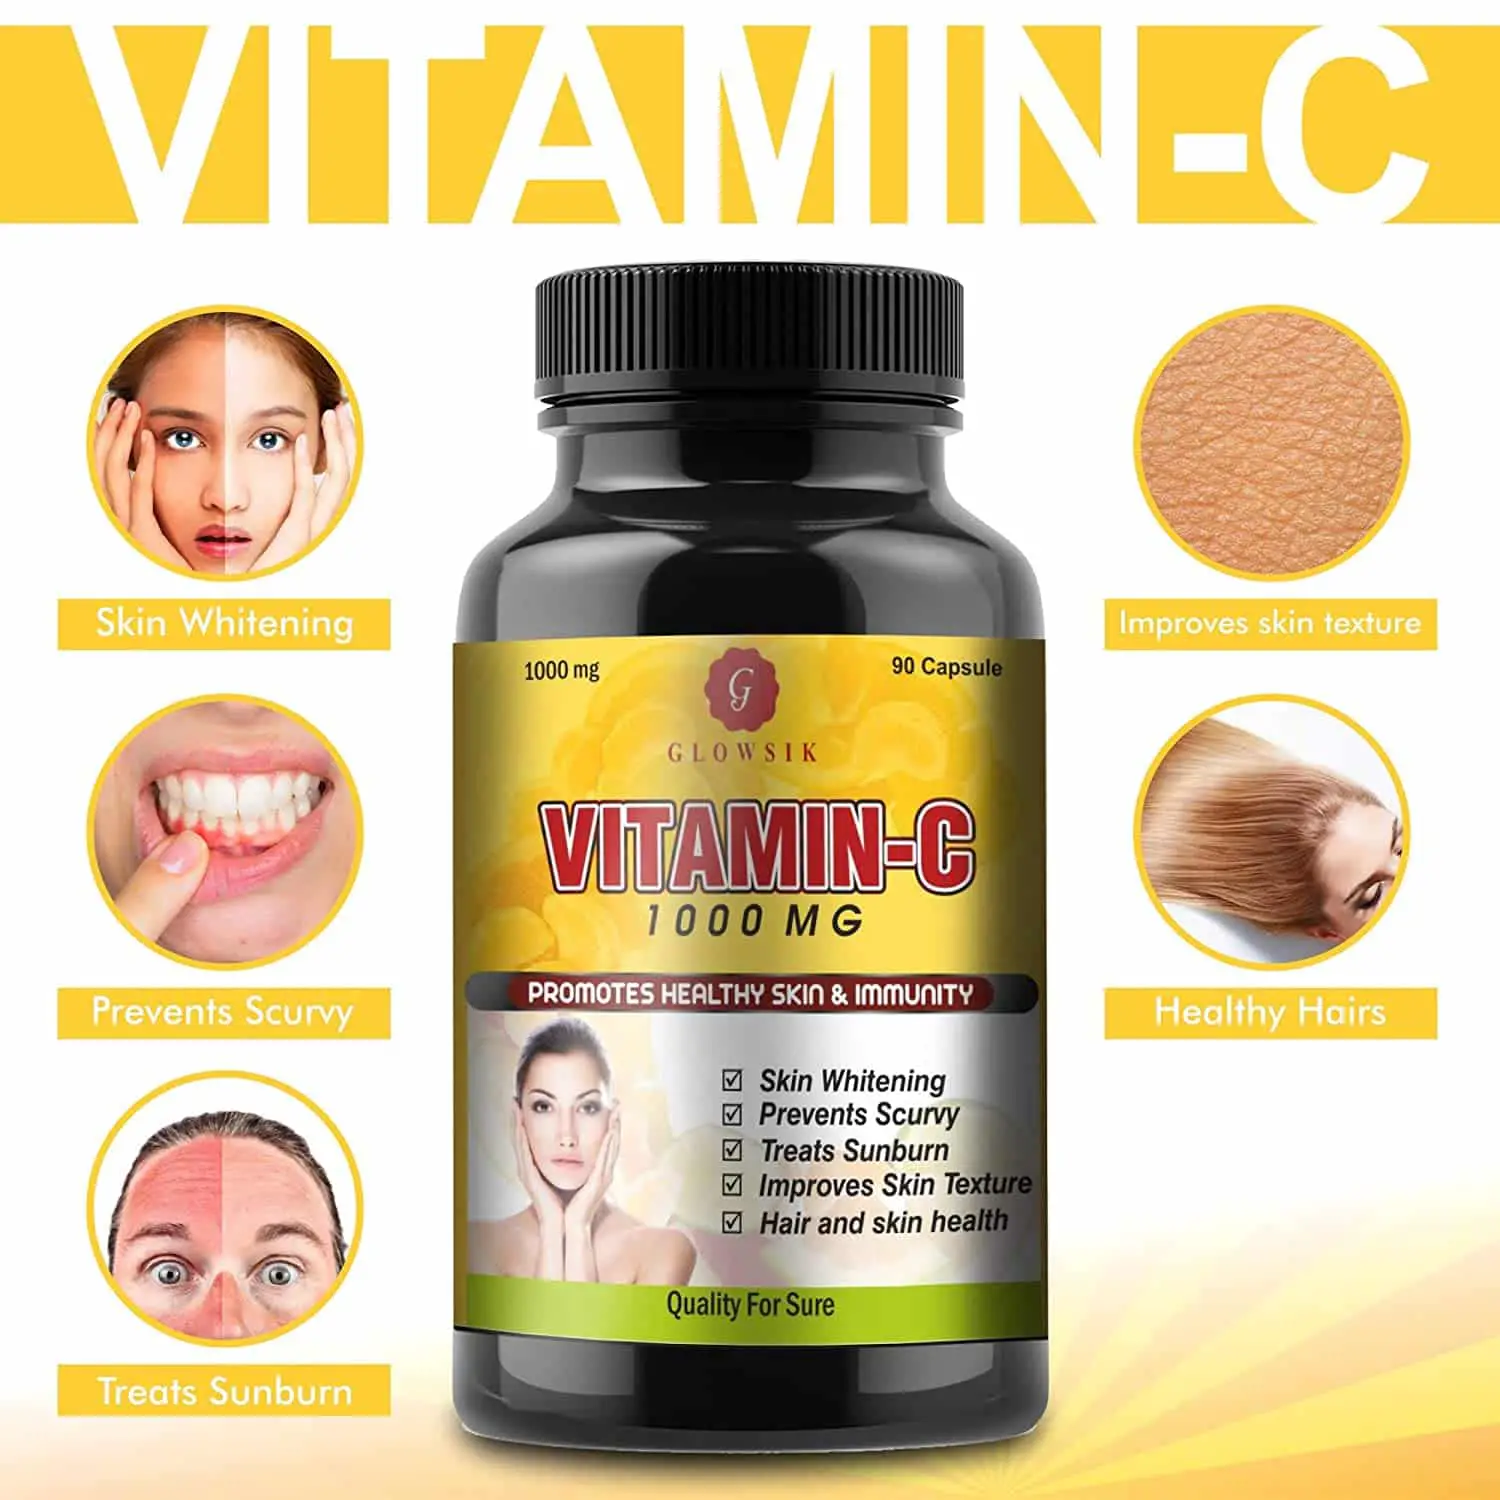 Benefits of vitamin c tablets for skin